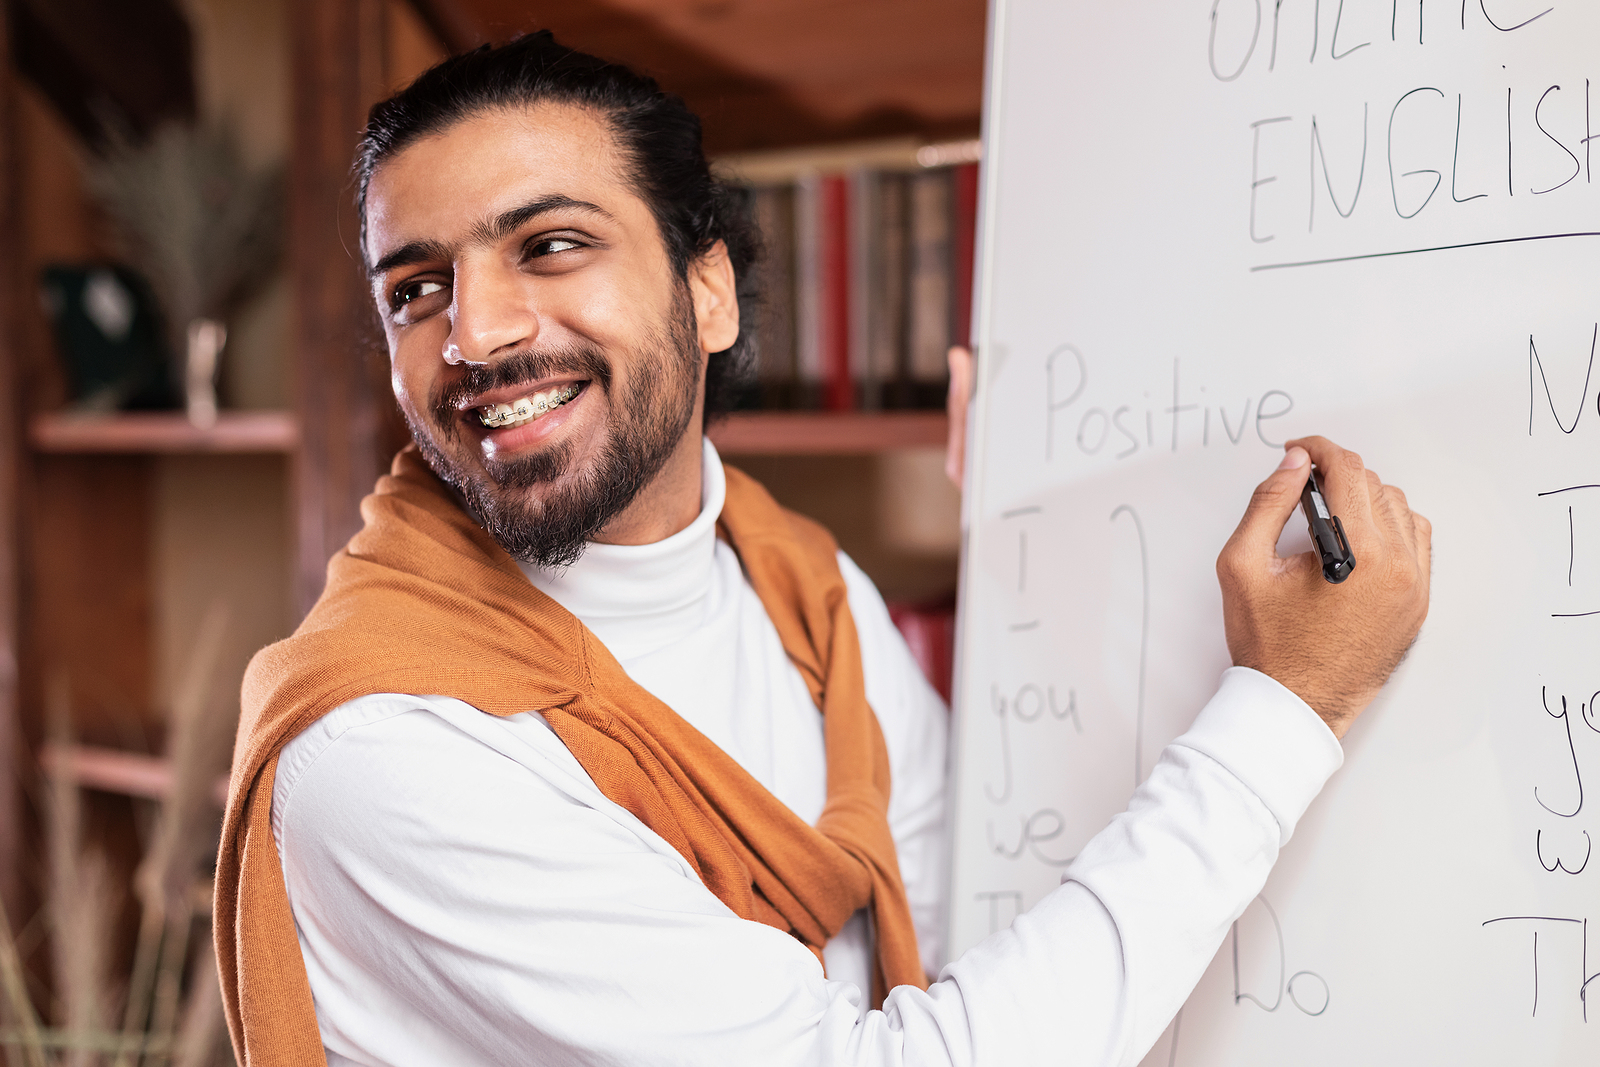 A multi racial man with braces and his hair in a bun, smiling and looking to the audience, writing words on a white board.